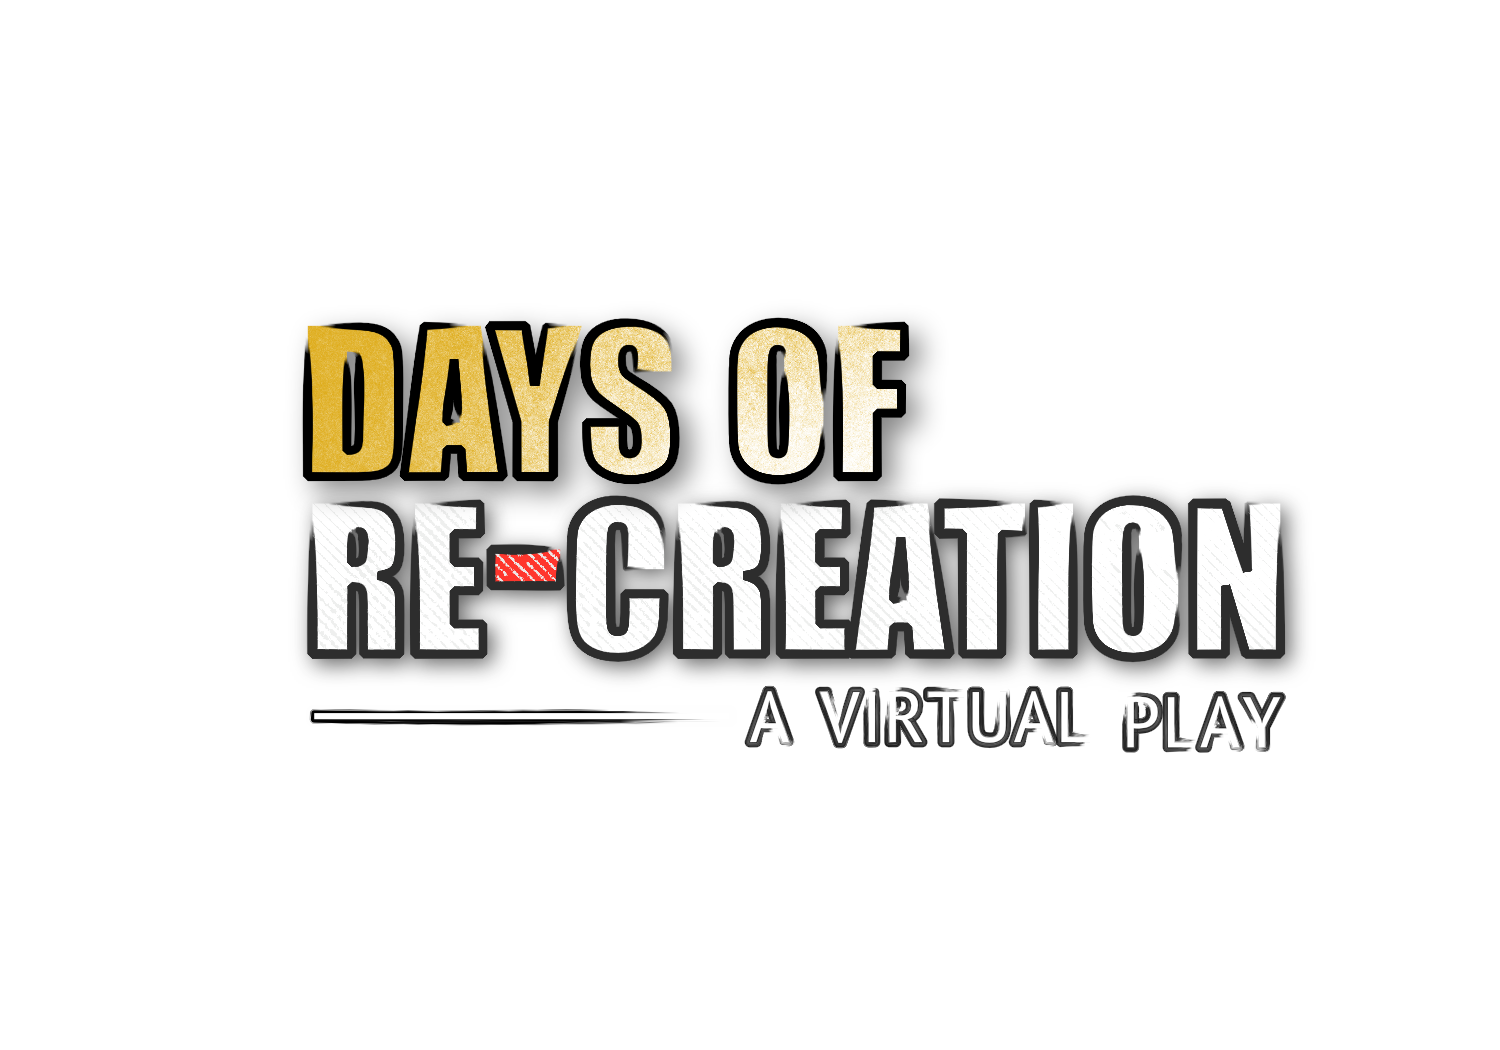 Days of Re-Creation